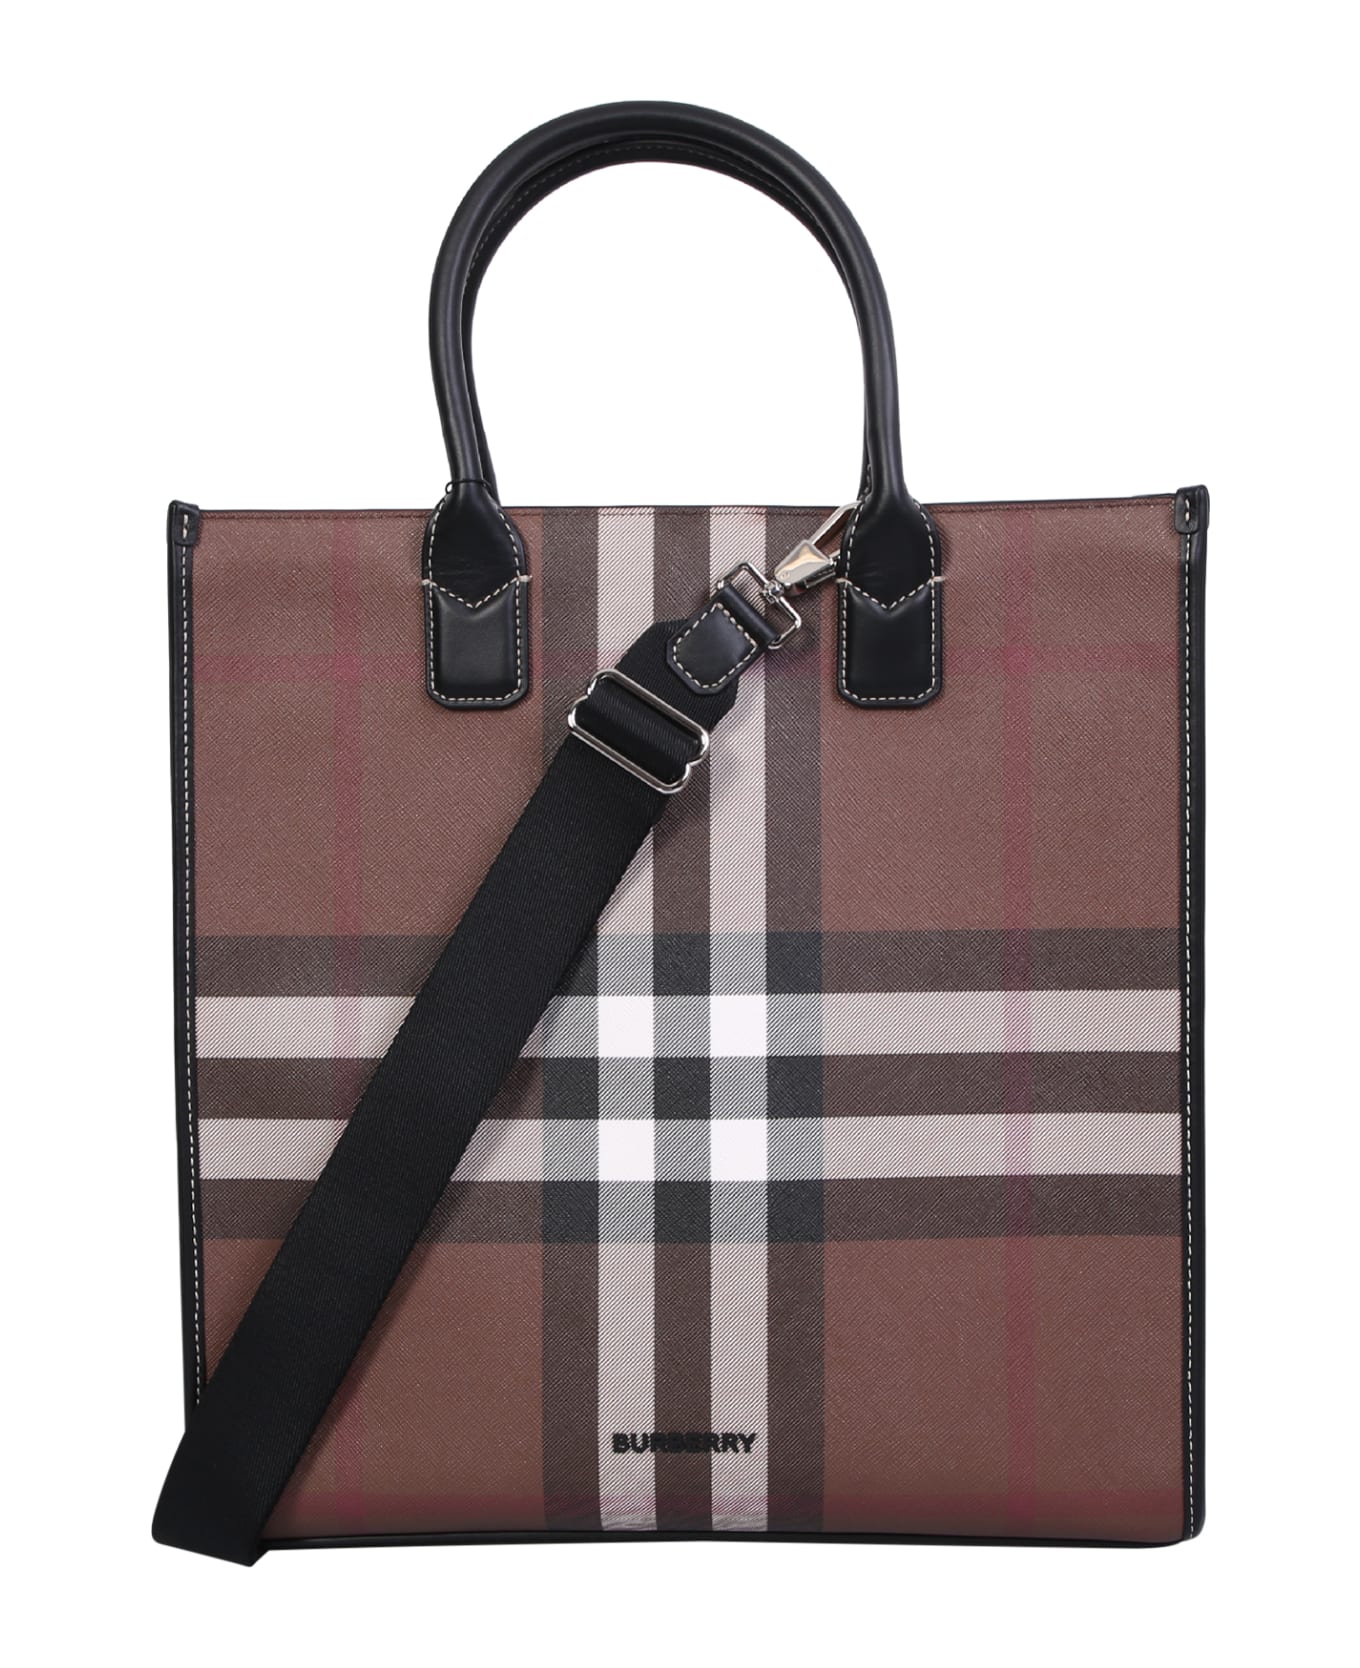 Burberry Tote Bag Denny - Brown トートバッグ